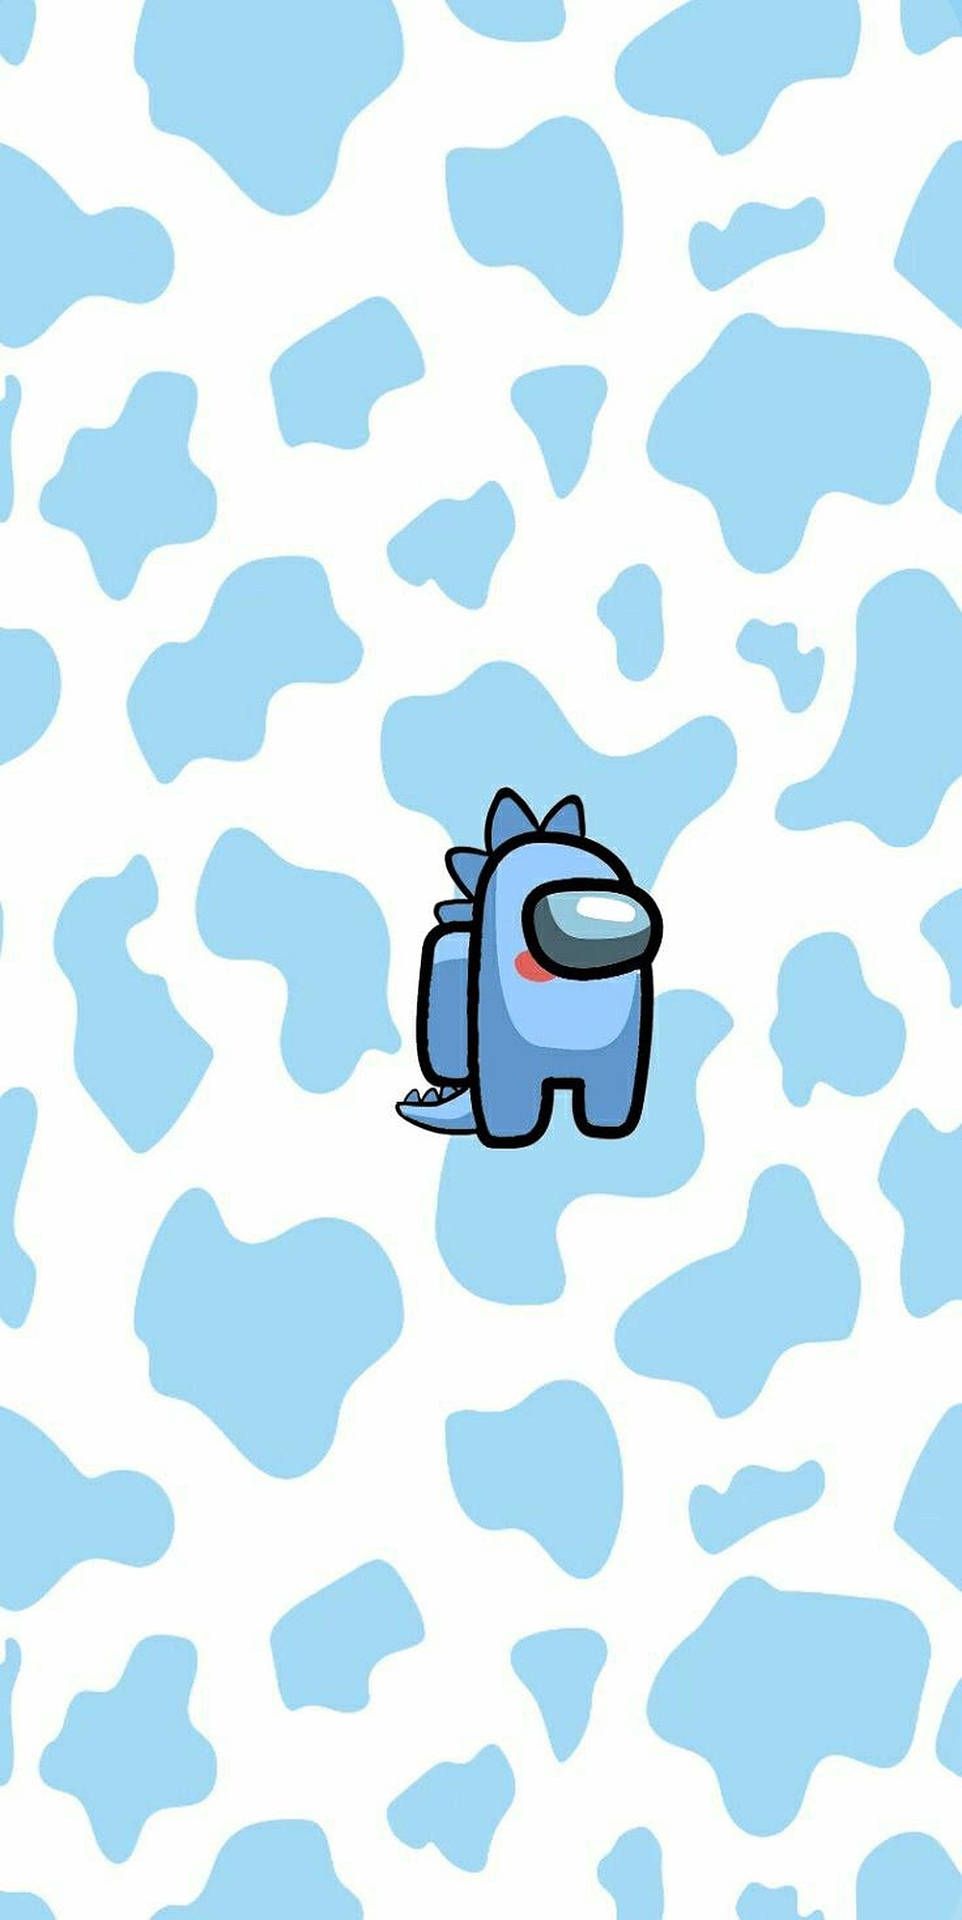 A blue cartoon character is sitting on top of some white and gray spots - Cow, Among Us